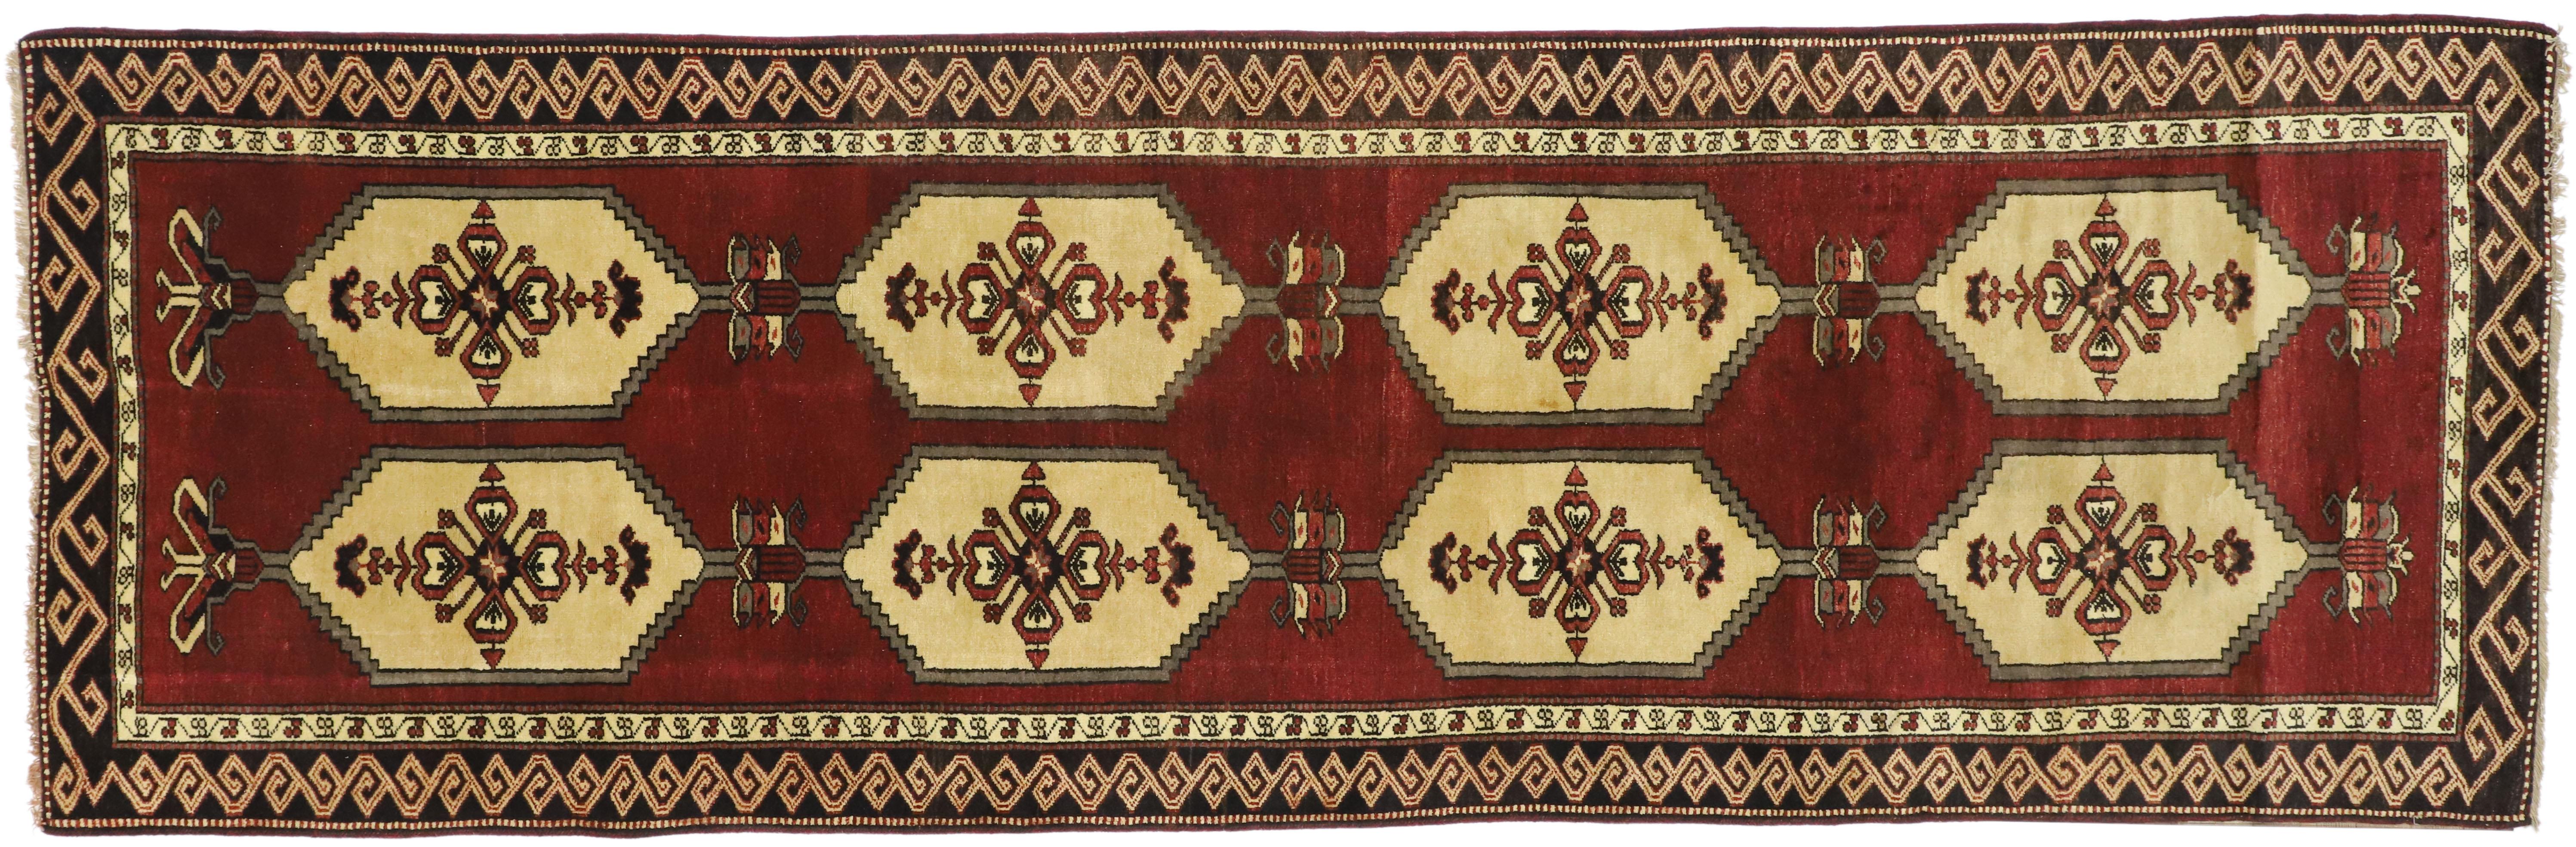 50470 Pair of Vintage Turkish Oushak Runners with Art Deco Style. Displaying balanced symmetry and bold geometric shapes, this pair of hand-knotted wool vintage Turkish Oushak runners beautifully embody Art Deco style. Each Oushak runner features a